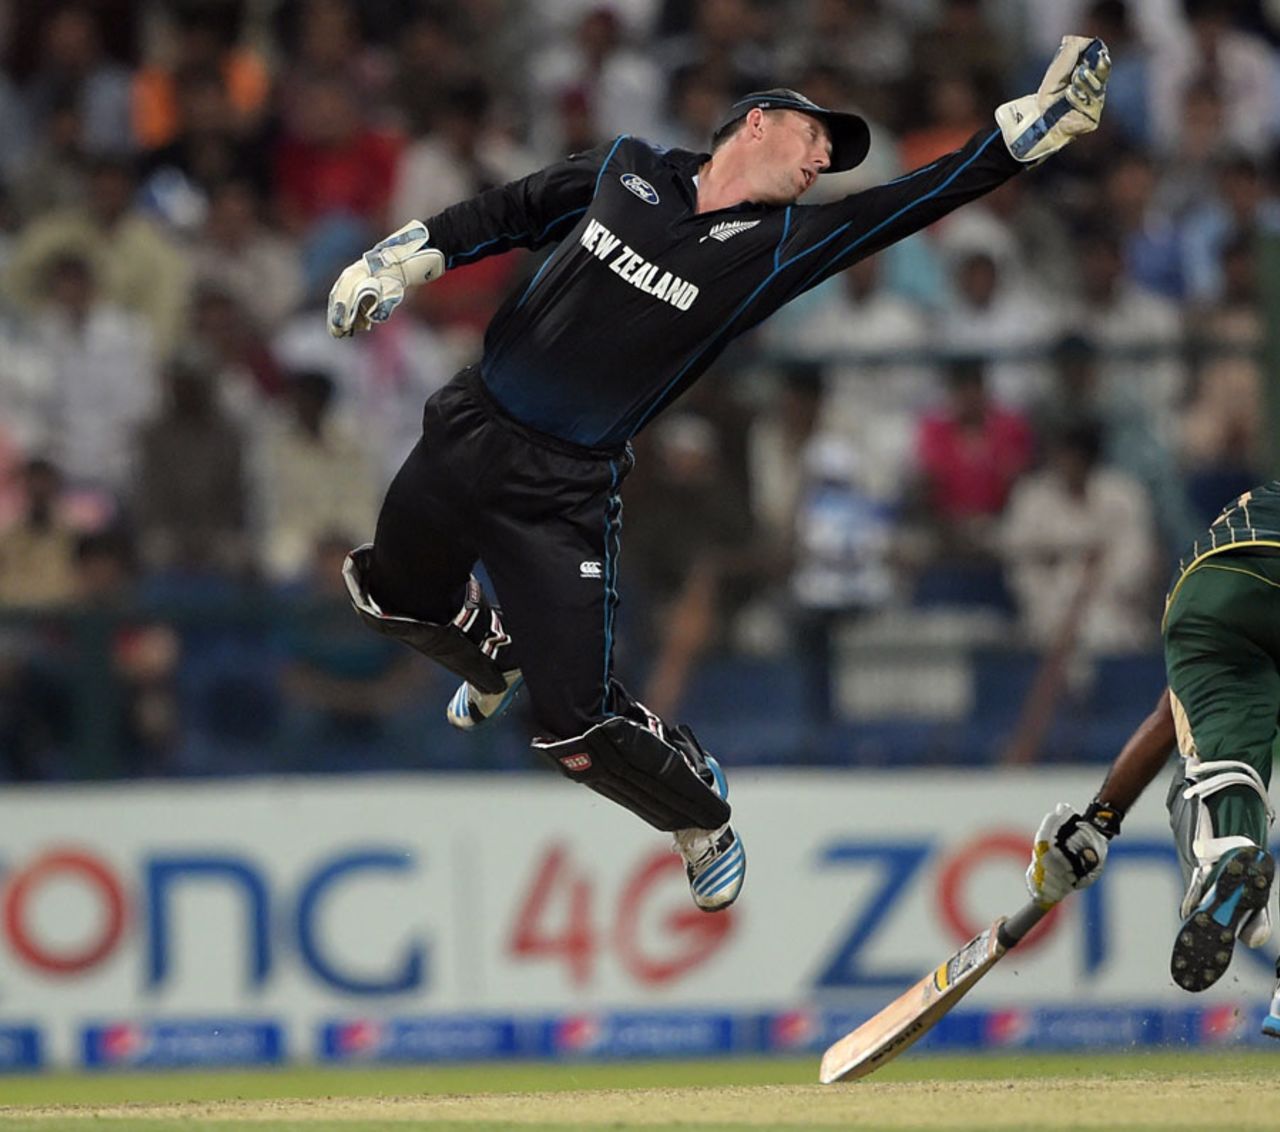 Luke Ronchi attempts to pick the ball out of the air, Pakistan v New Zealand, 5th ODI, Abu Dhabi, December 19, 2014